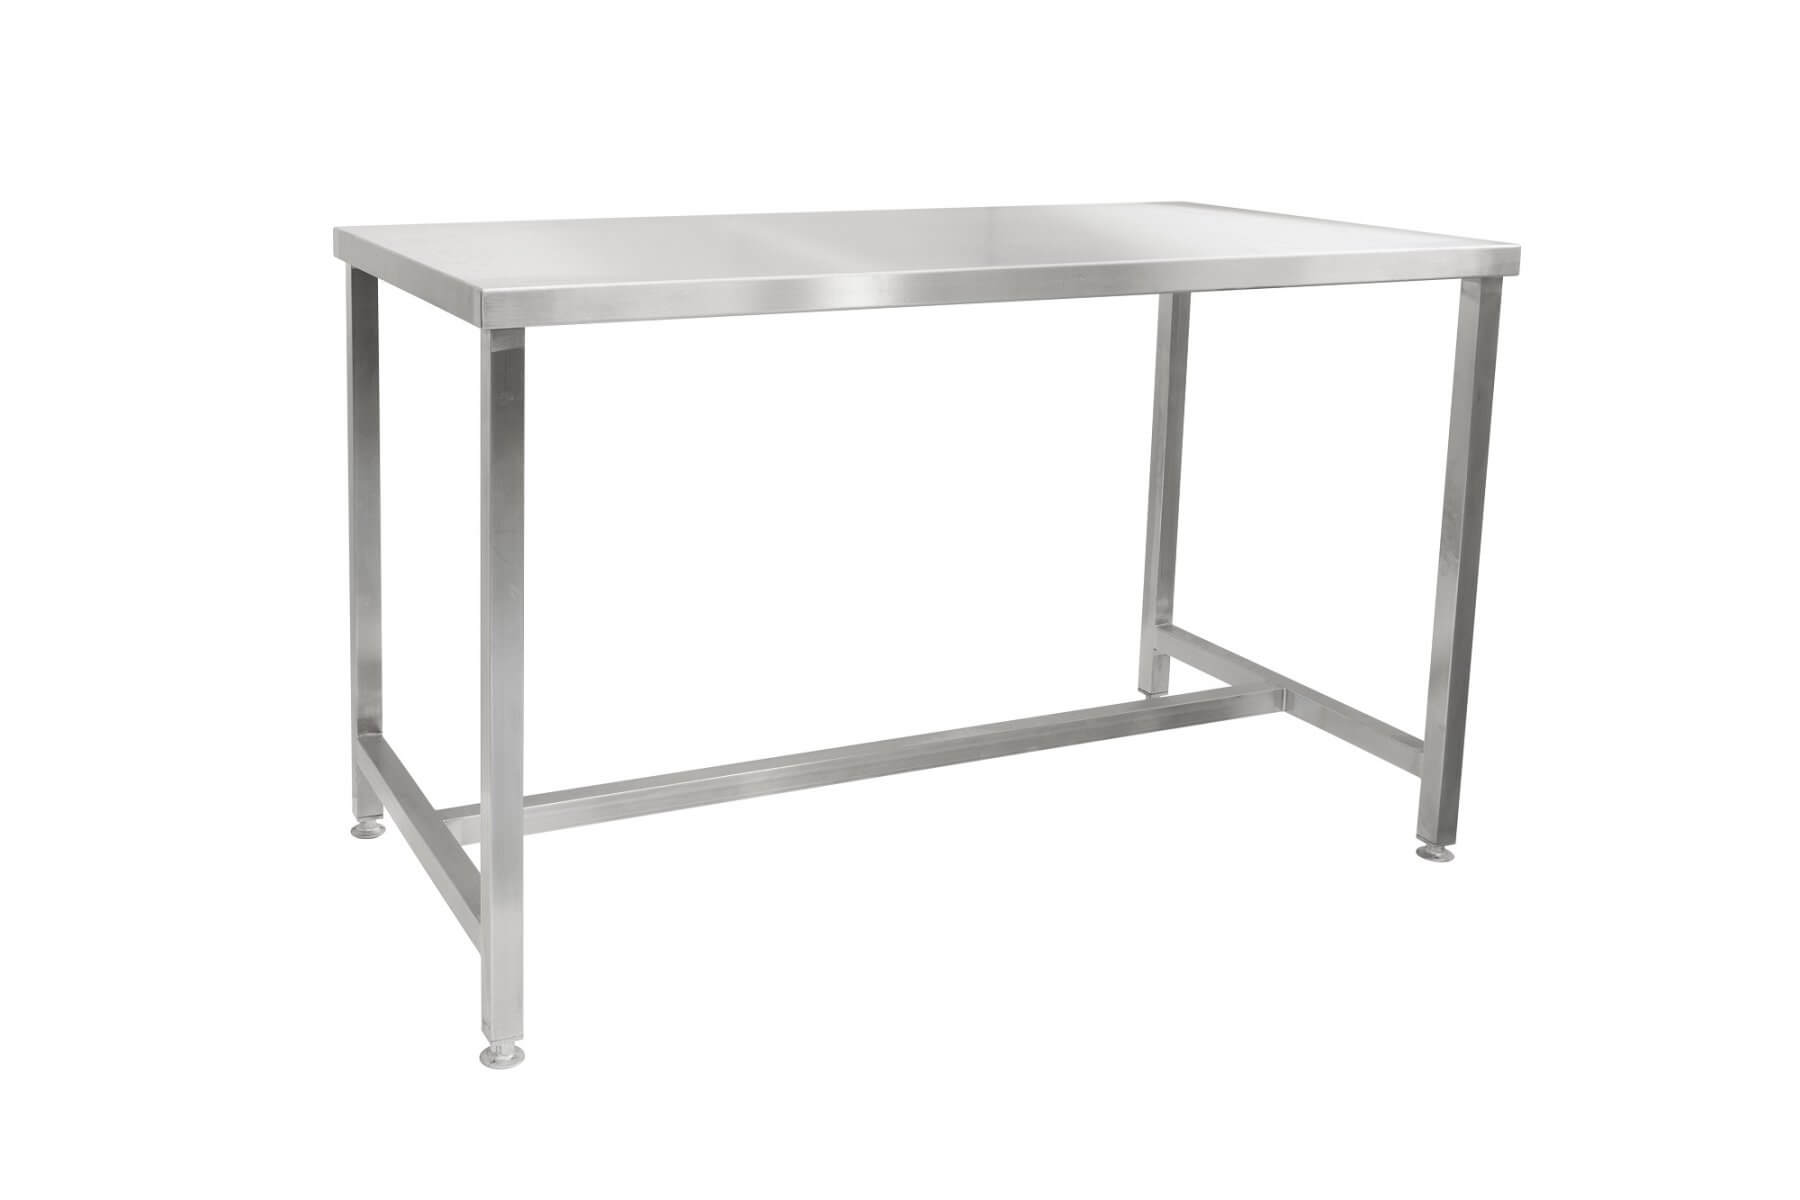 Designing a Functional and Stylish Stainless Steel Workbench for Your Garage